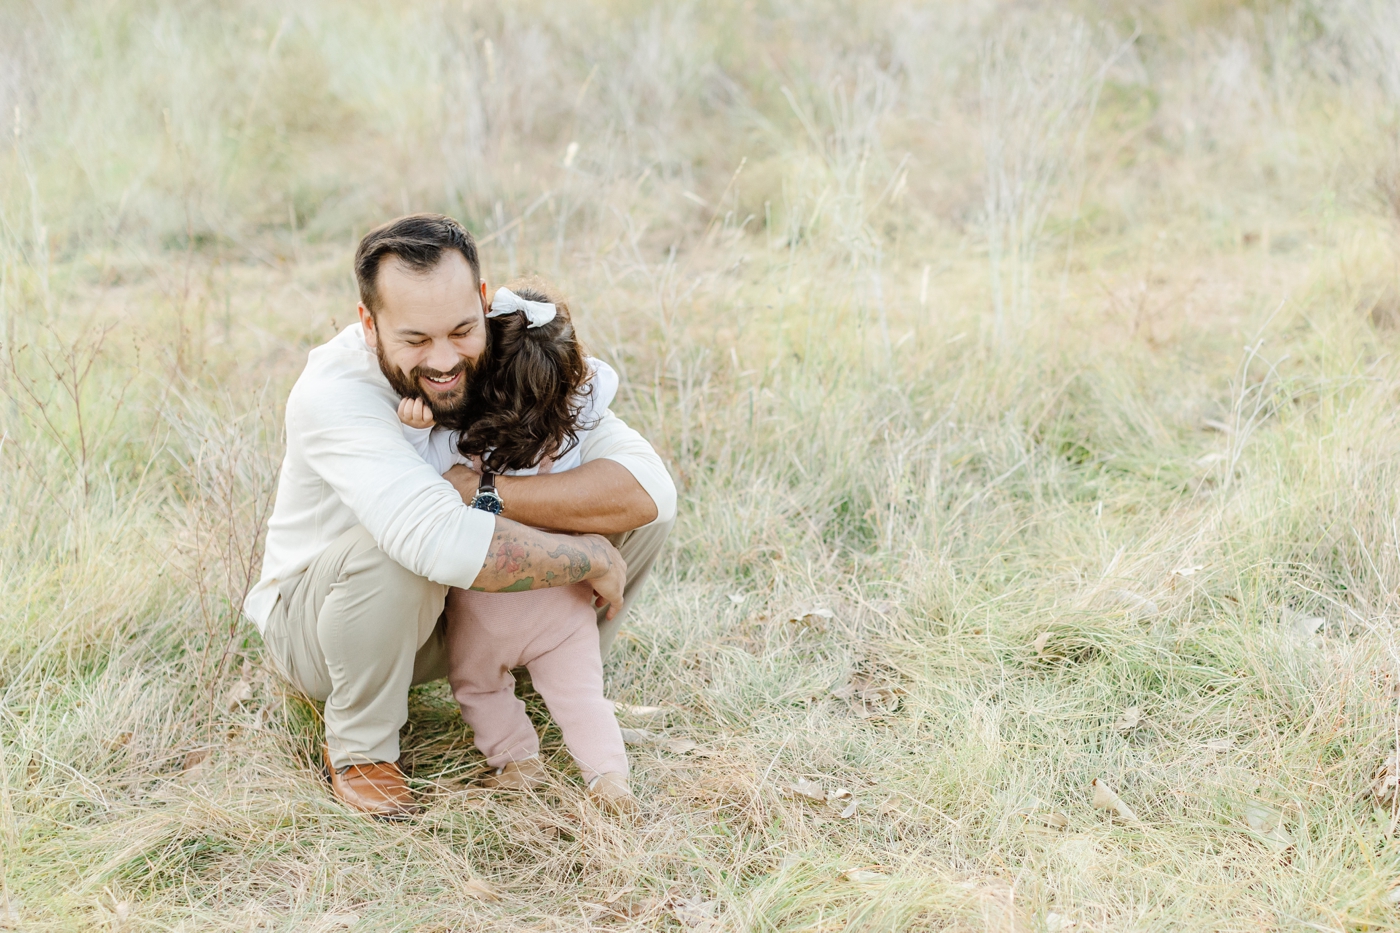 Dad and daughter hug during park family session in Austin. Photo by Sana Ahmed Photography.